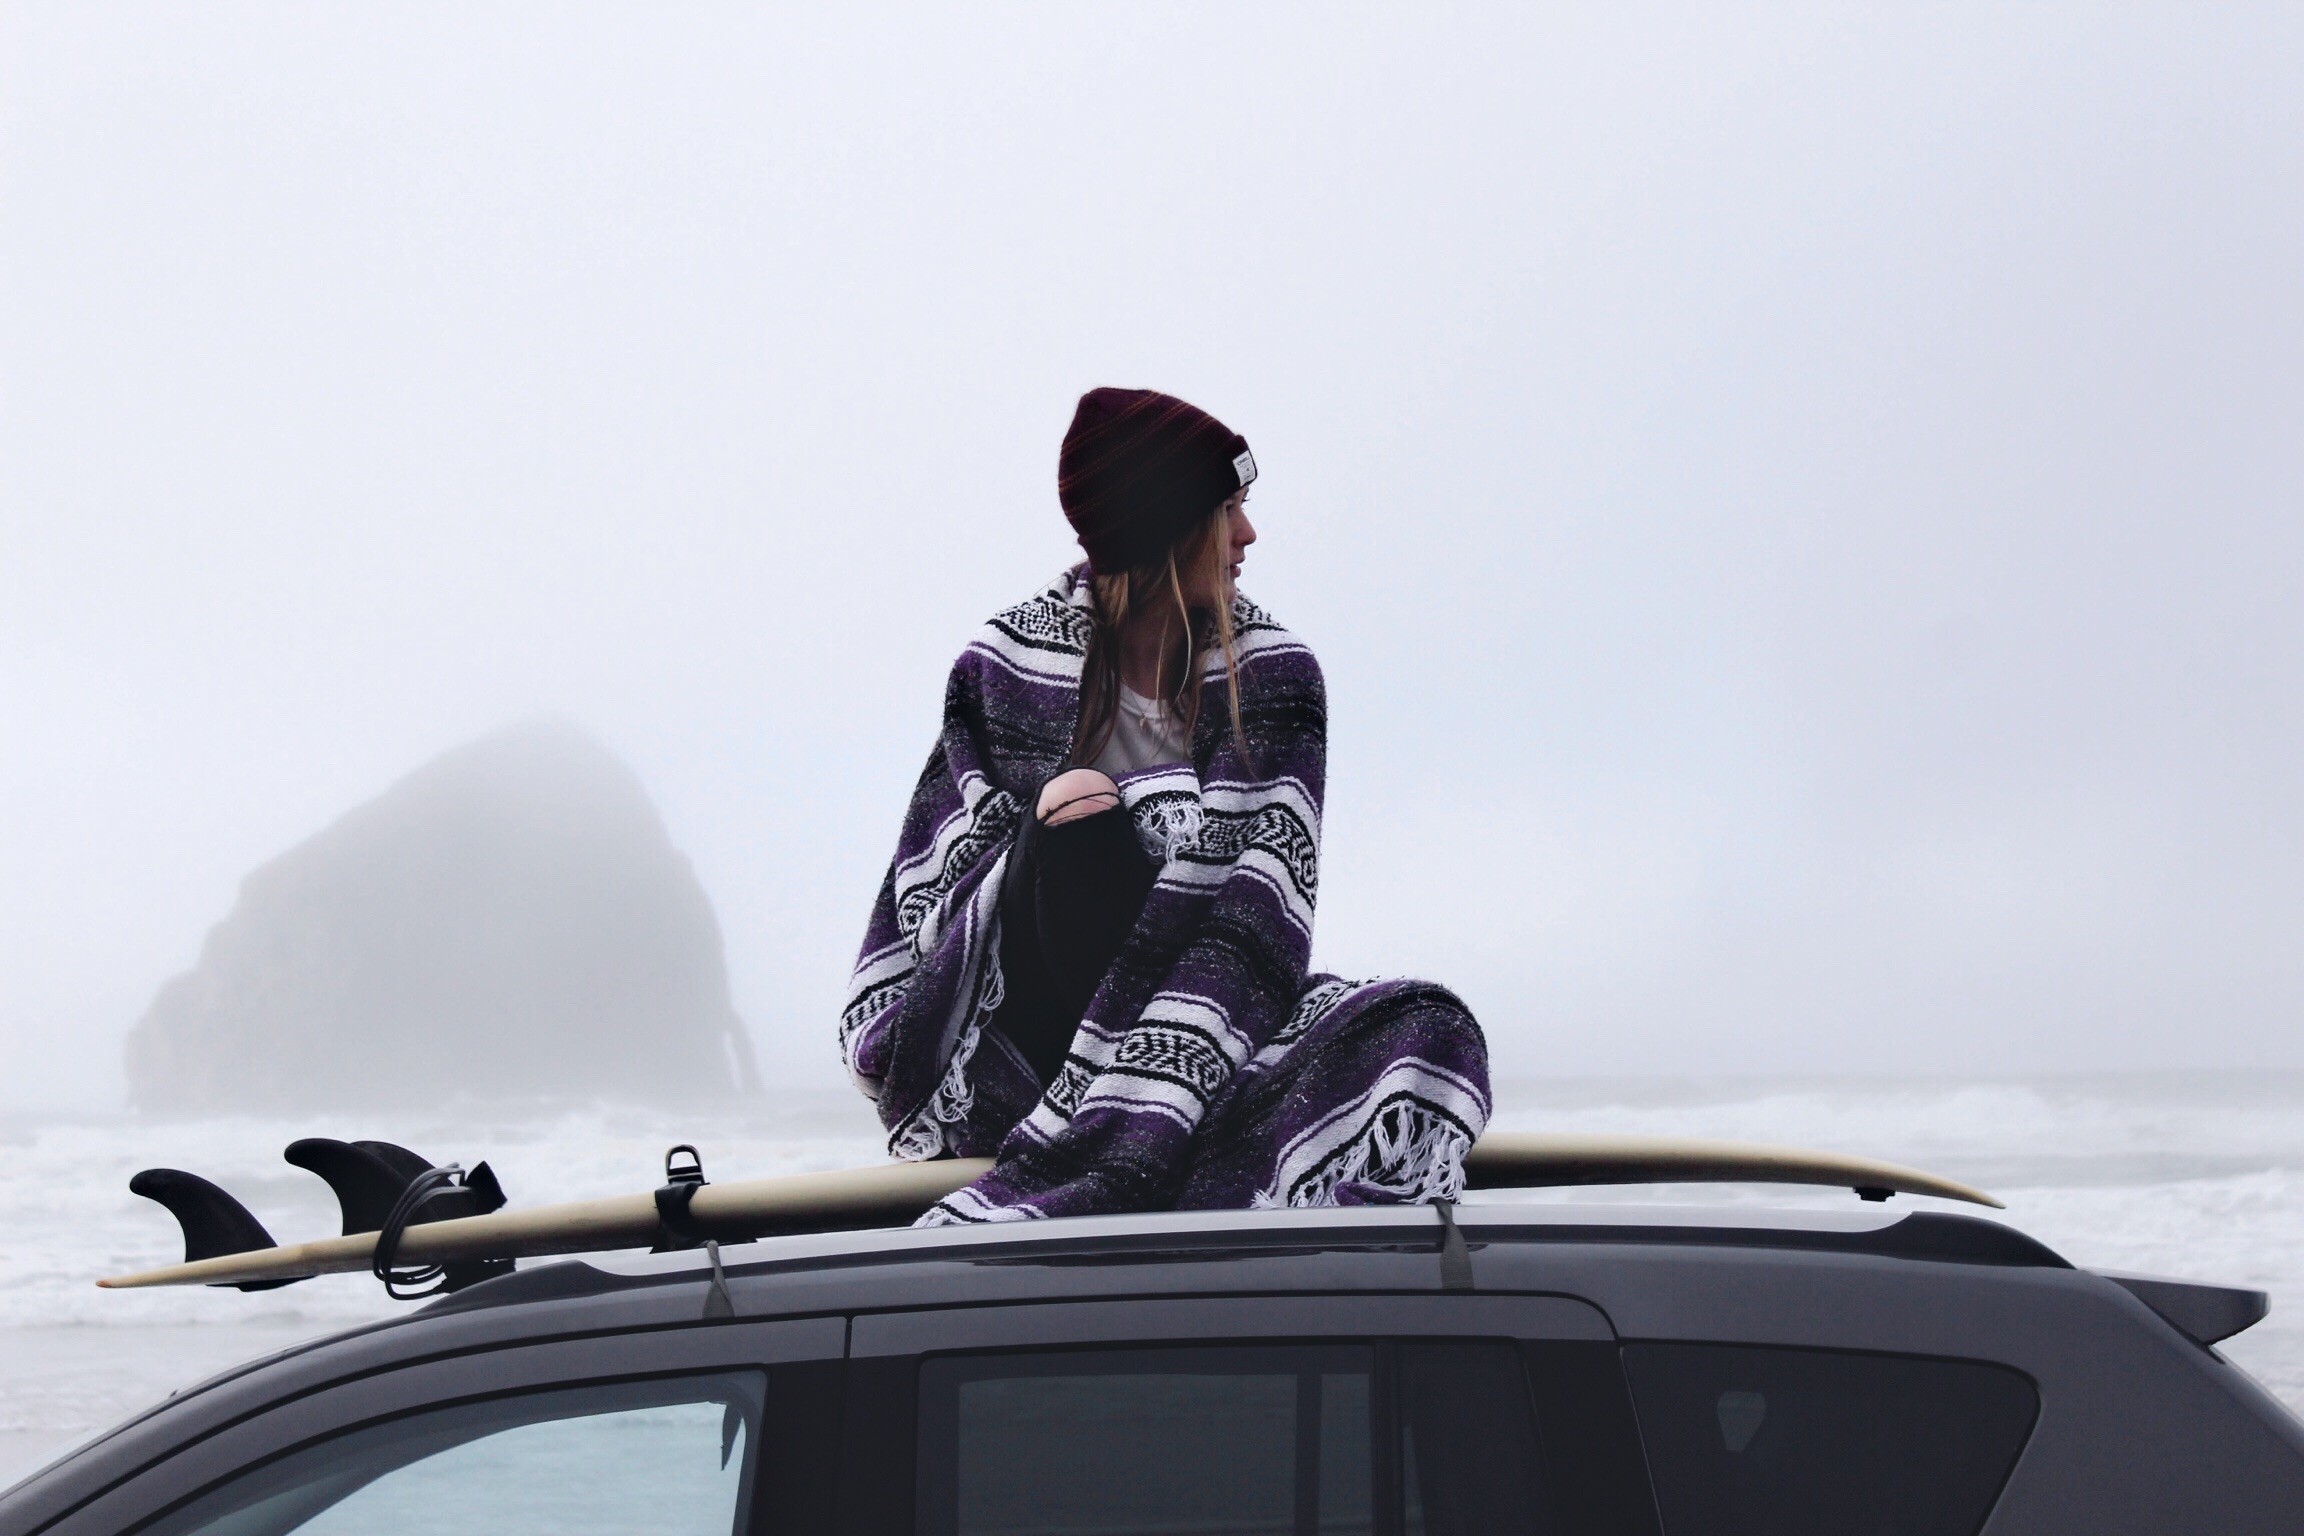 People 2304x1536 photography beach surfboards women mist women with cars surfers women outdoors